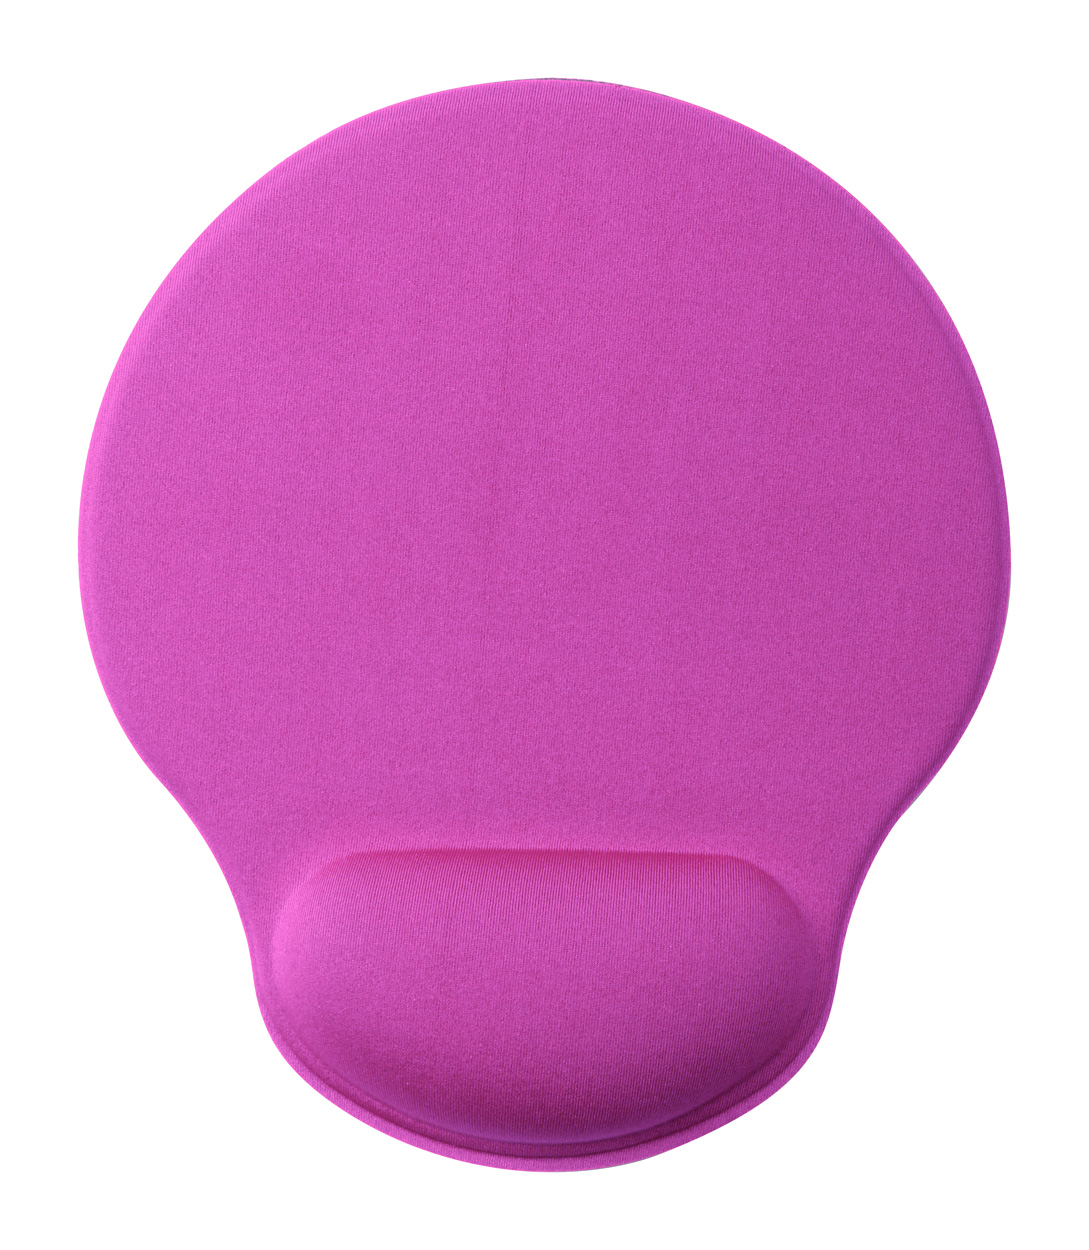 Missing mouse pad - pink